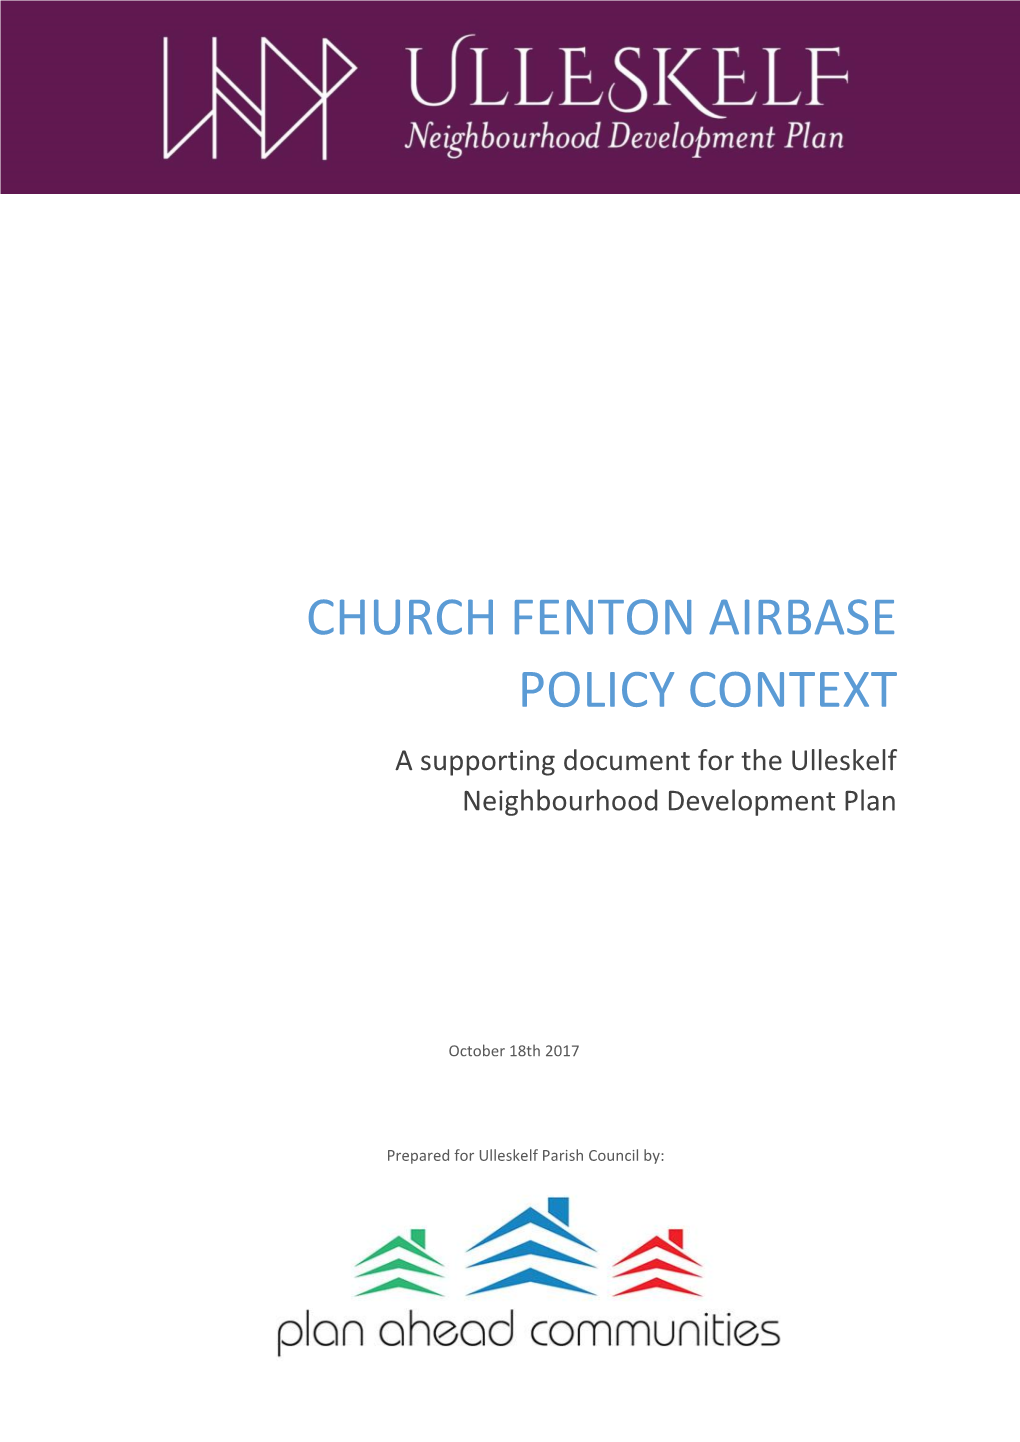 CHURCH FENTON AIRBASE POLICY CONTEXT a Supporting Document for the Ulleskelf Neighbourhood Development Plan